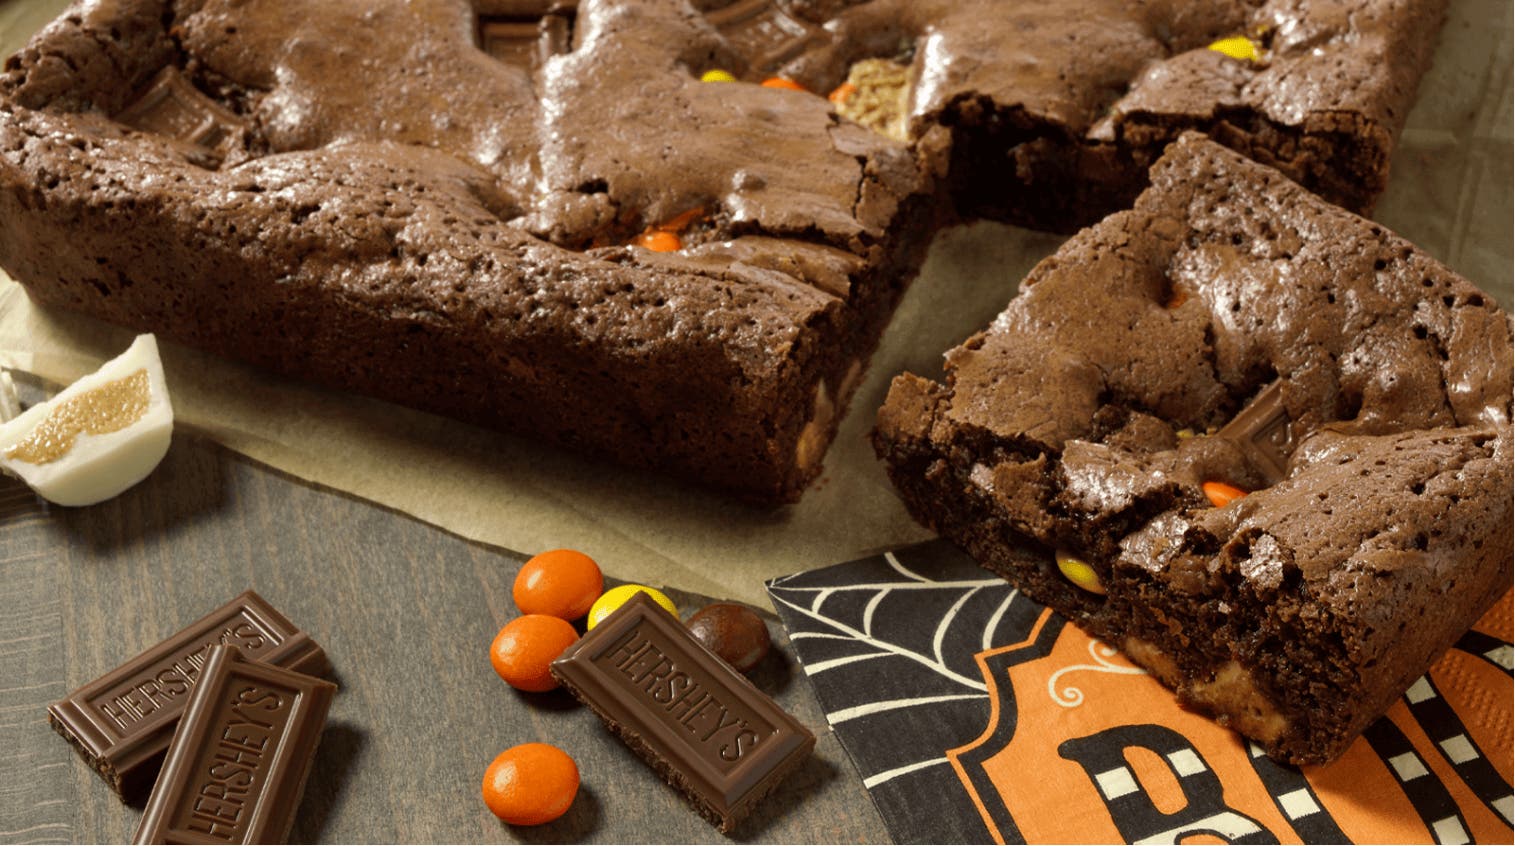 Brownies with reese's, hershey chocolate bar pieces, and reese's pieces baked into them